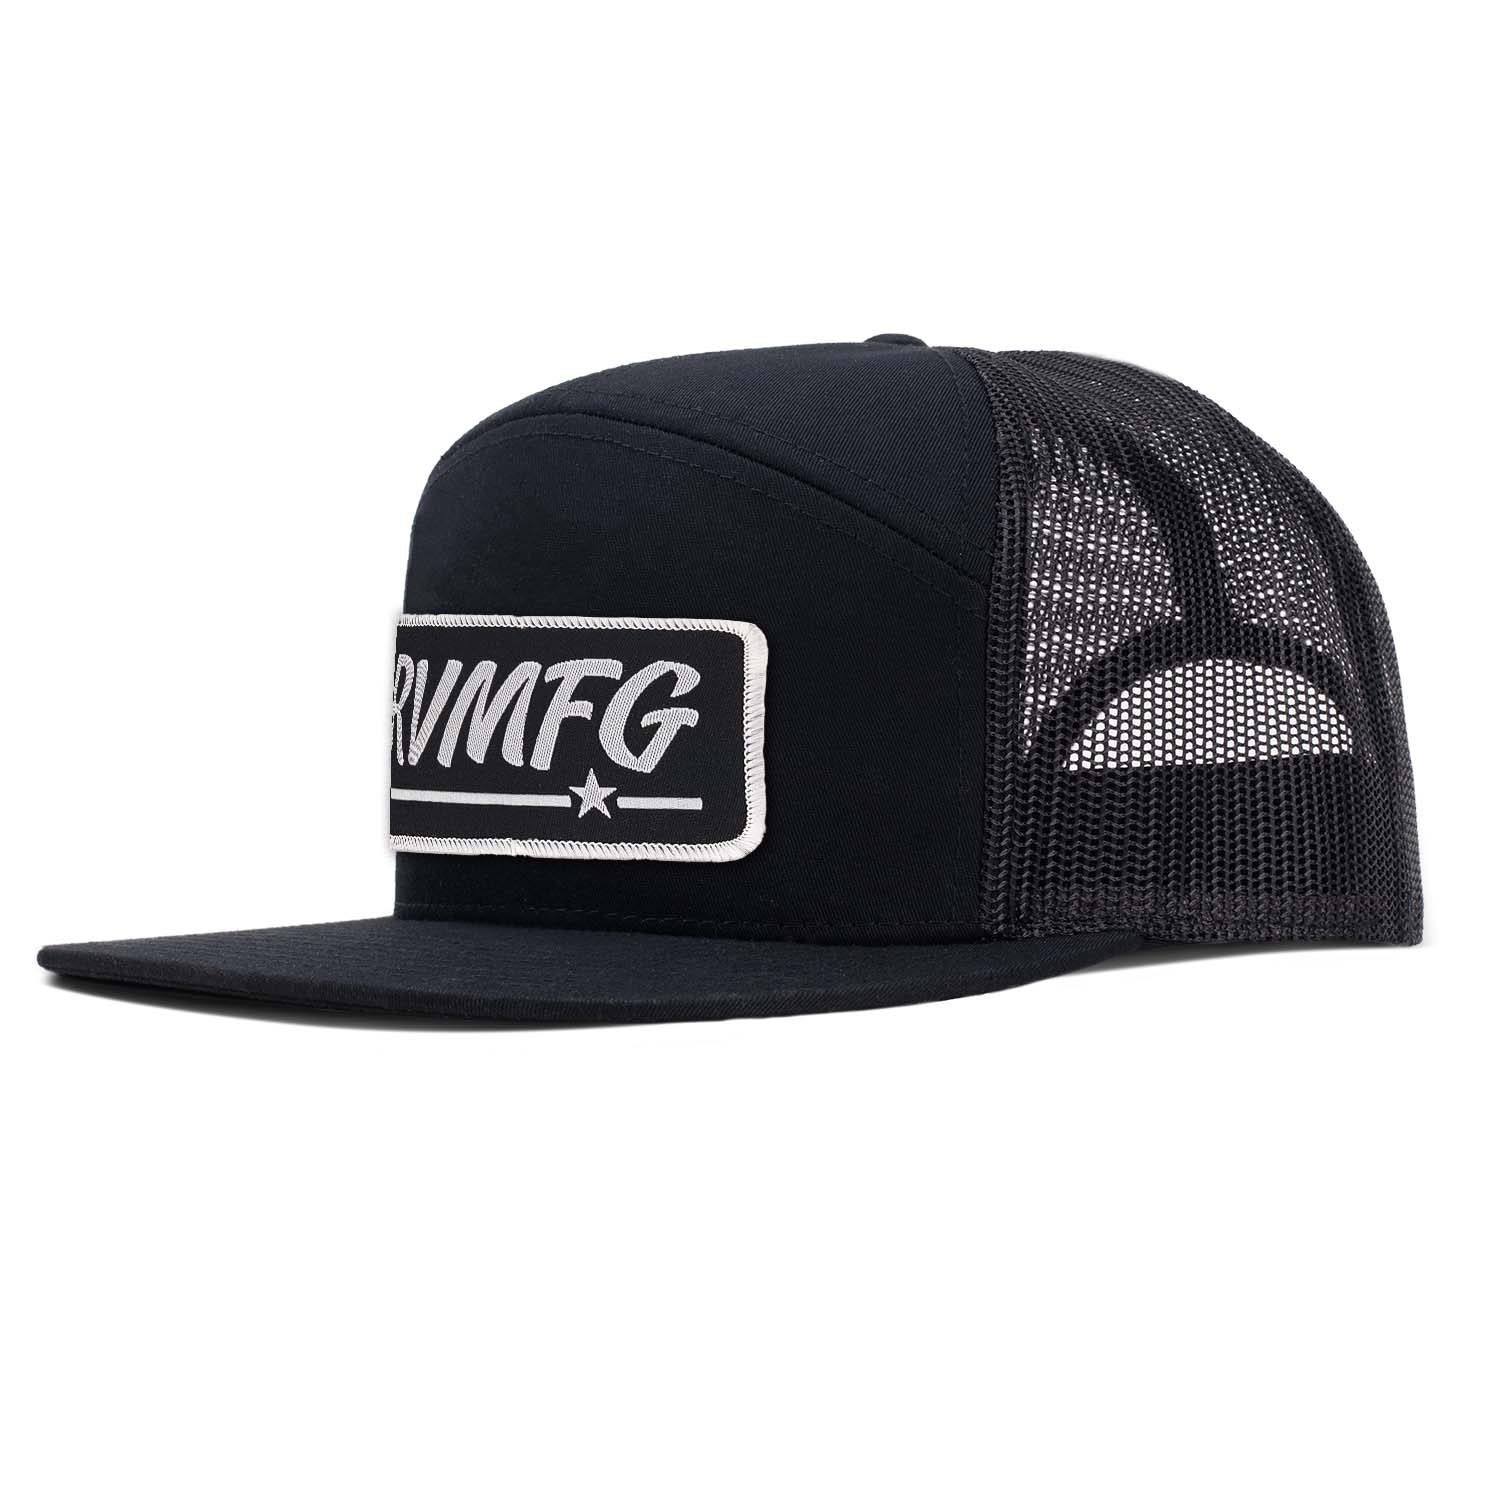 Revolution Mfg all black 7 panel flat bill with black RVMFG woven patch with white letters and white border